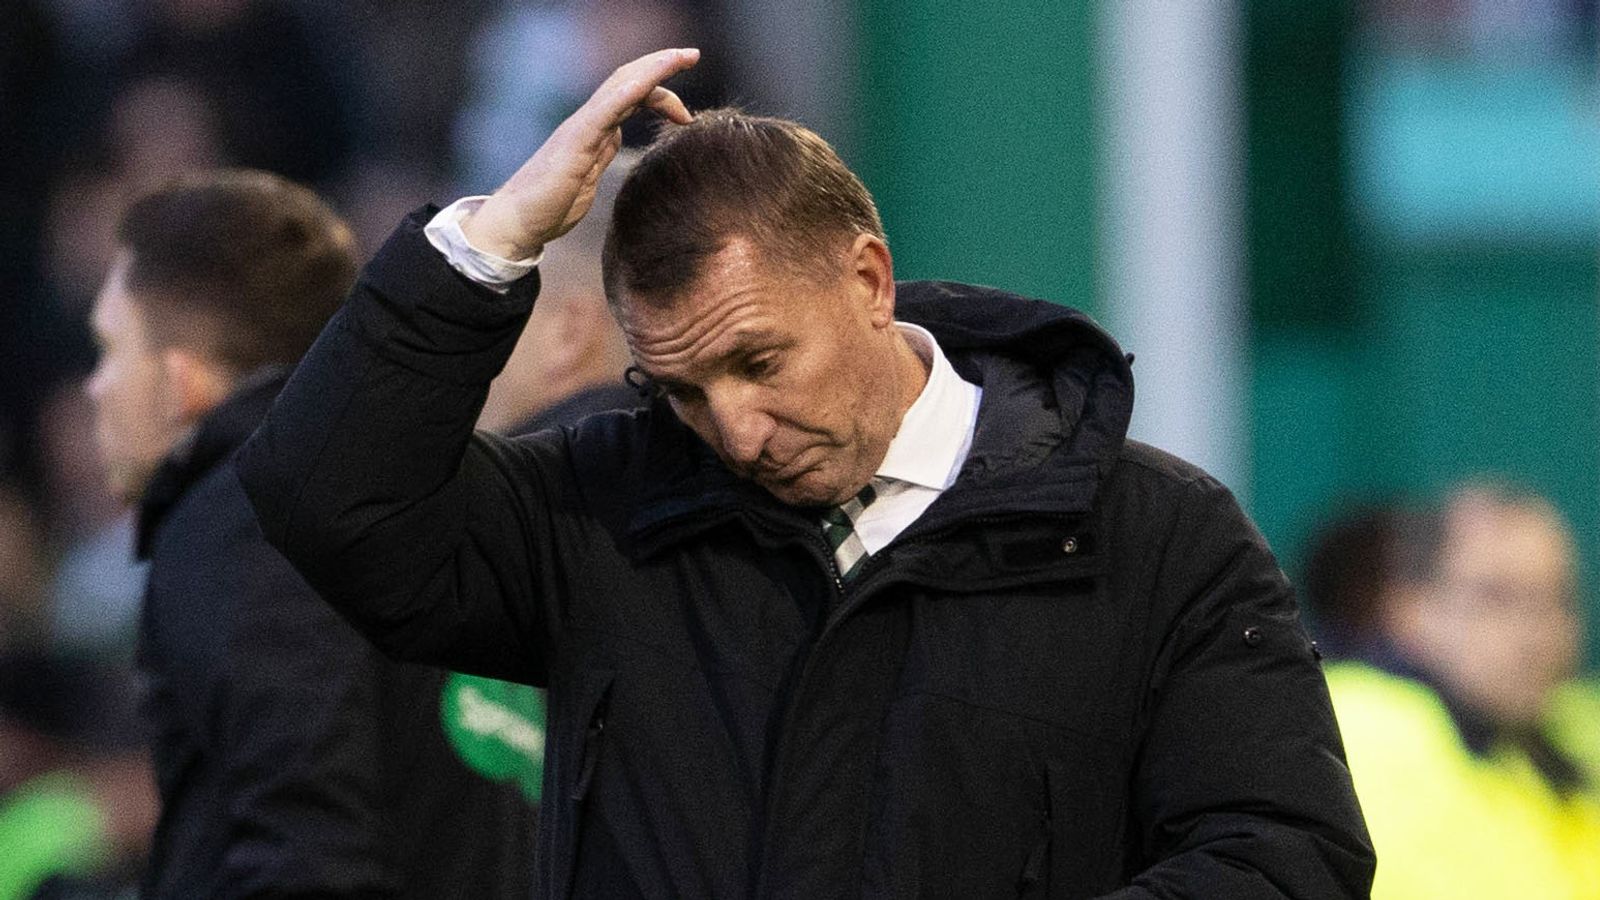 Hibs 0-0 Celtic: Brendan Rodgers’ winless run at Easter Road continues after stalemate in the Scottish Premiership |  football news